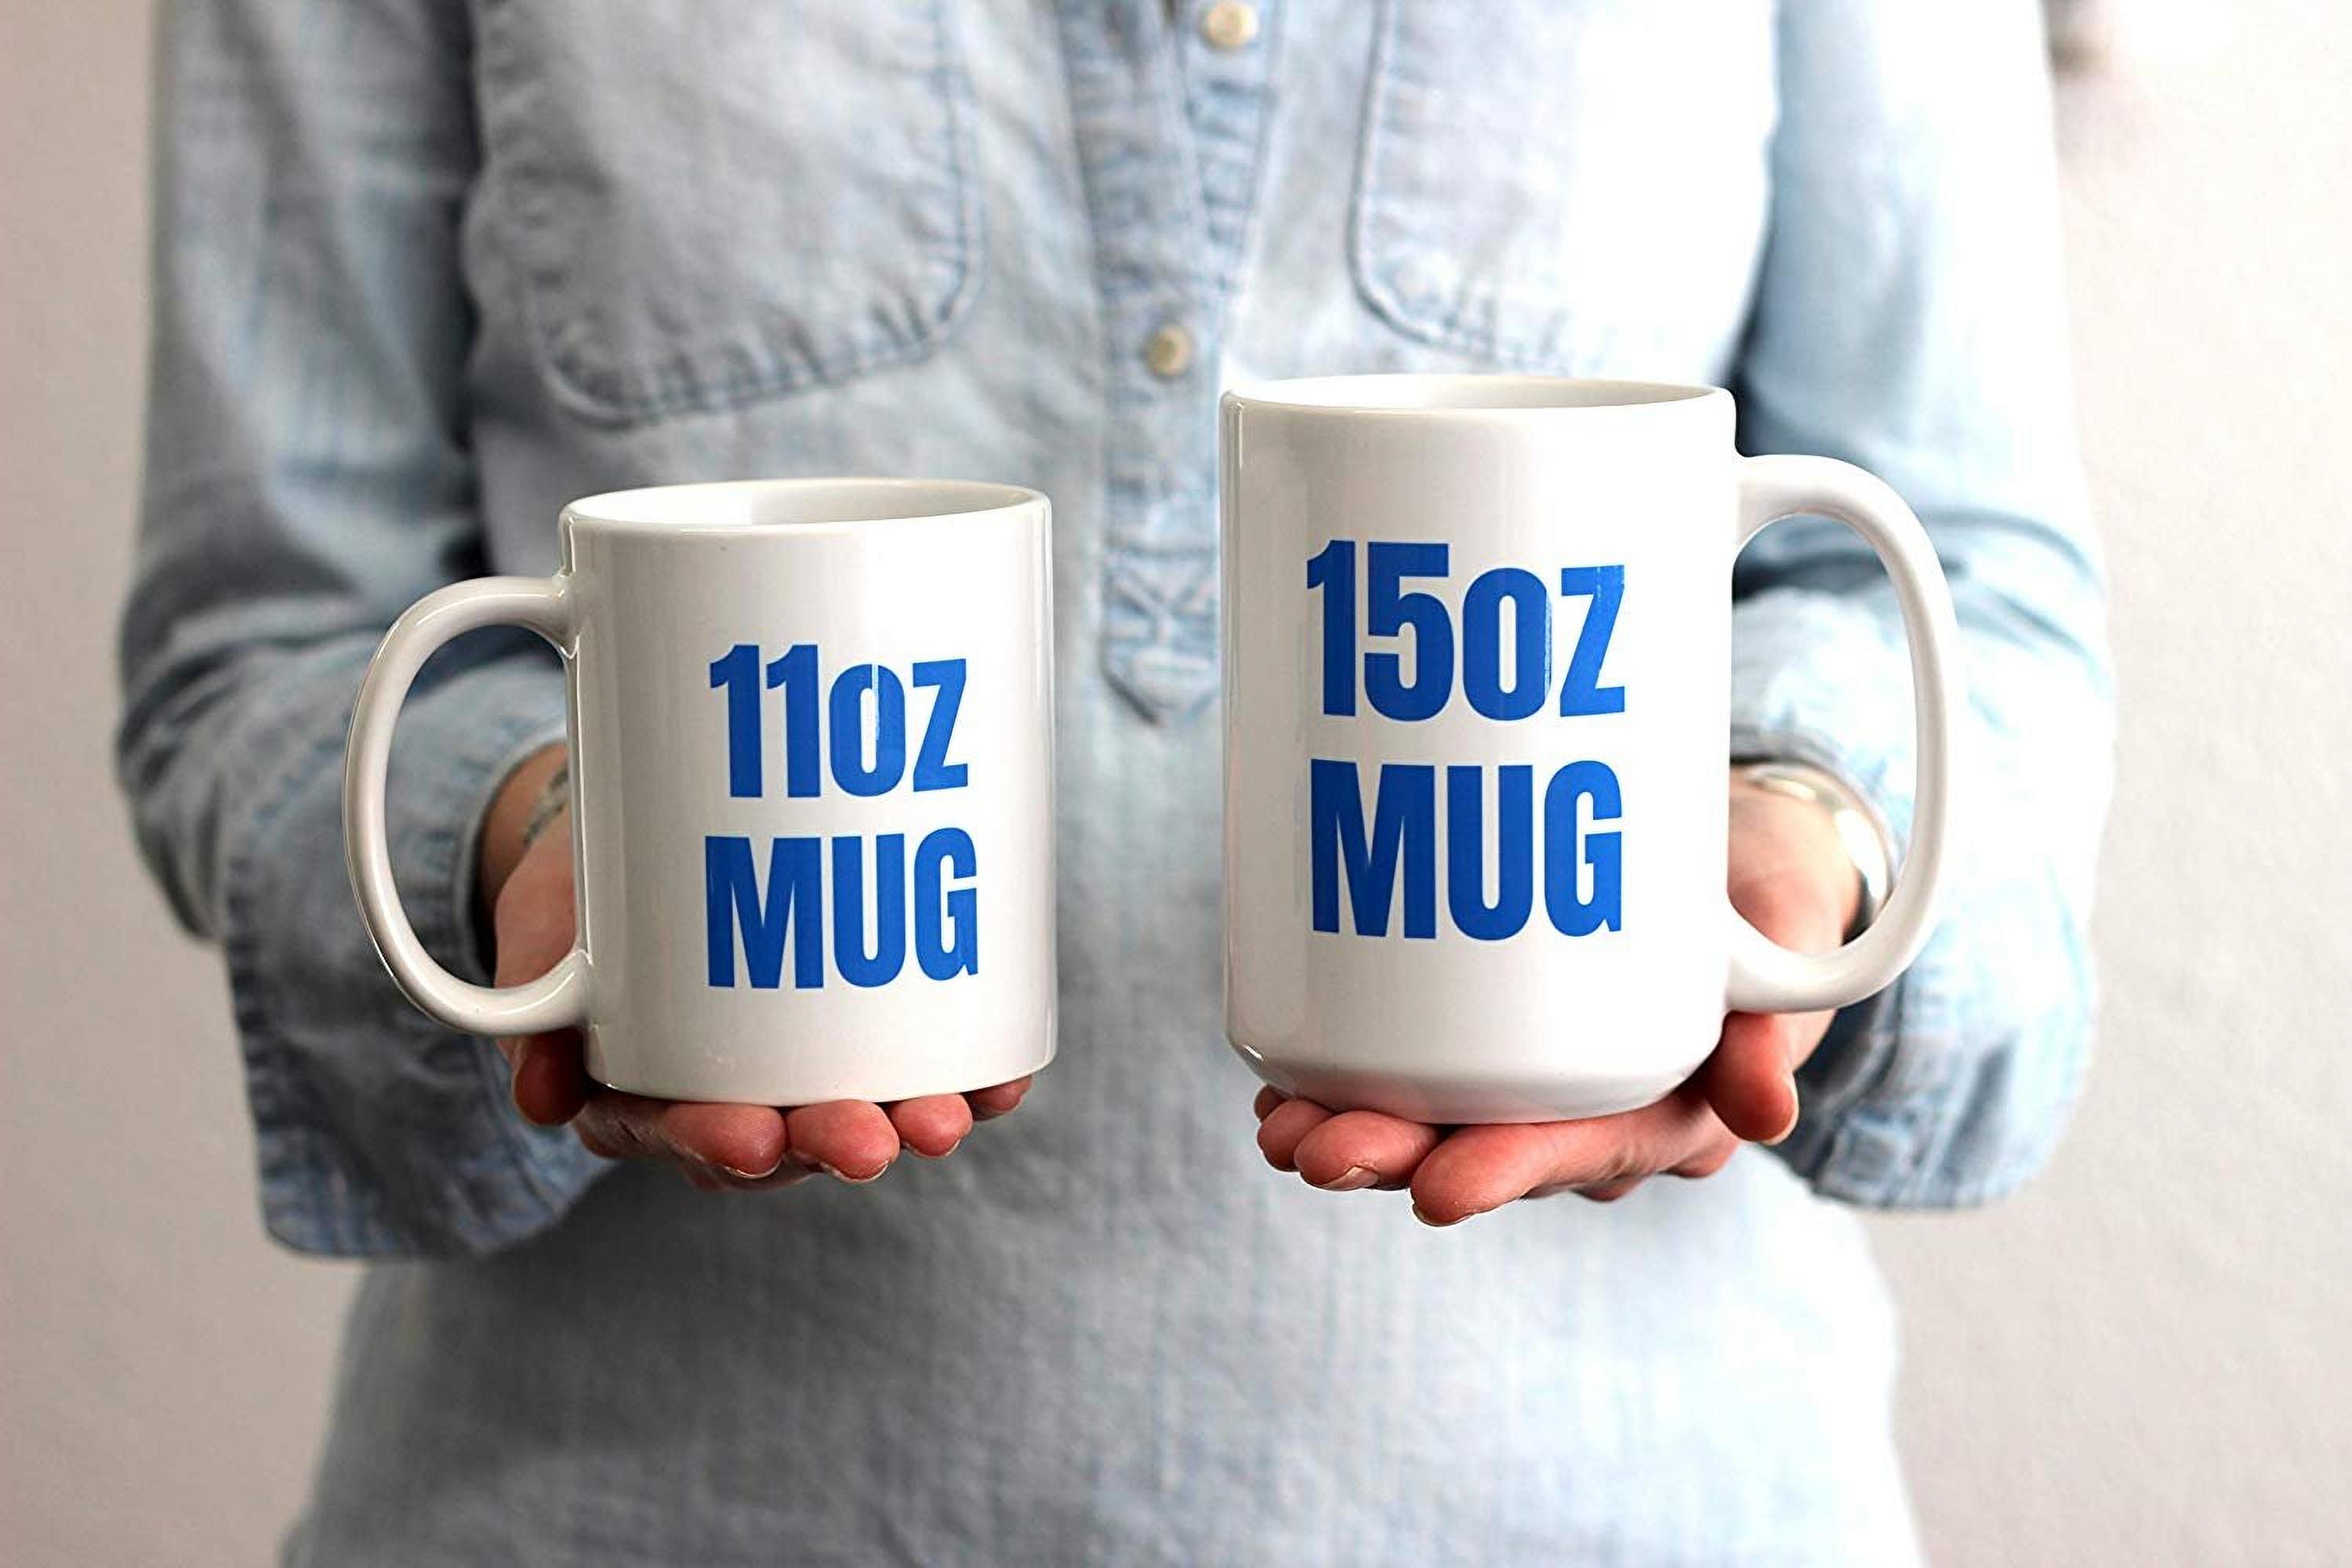 Marriage Is A Relationship In Which One Person Is Always Right Quotes Coffee & Tea Gift Mug Stuff And Funny Wedding Day, Anniversary Or Milestone Gifts For A Couple, Wife, Husband, Bride & Groom - image 4 of 4